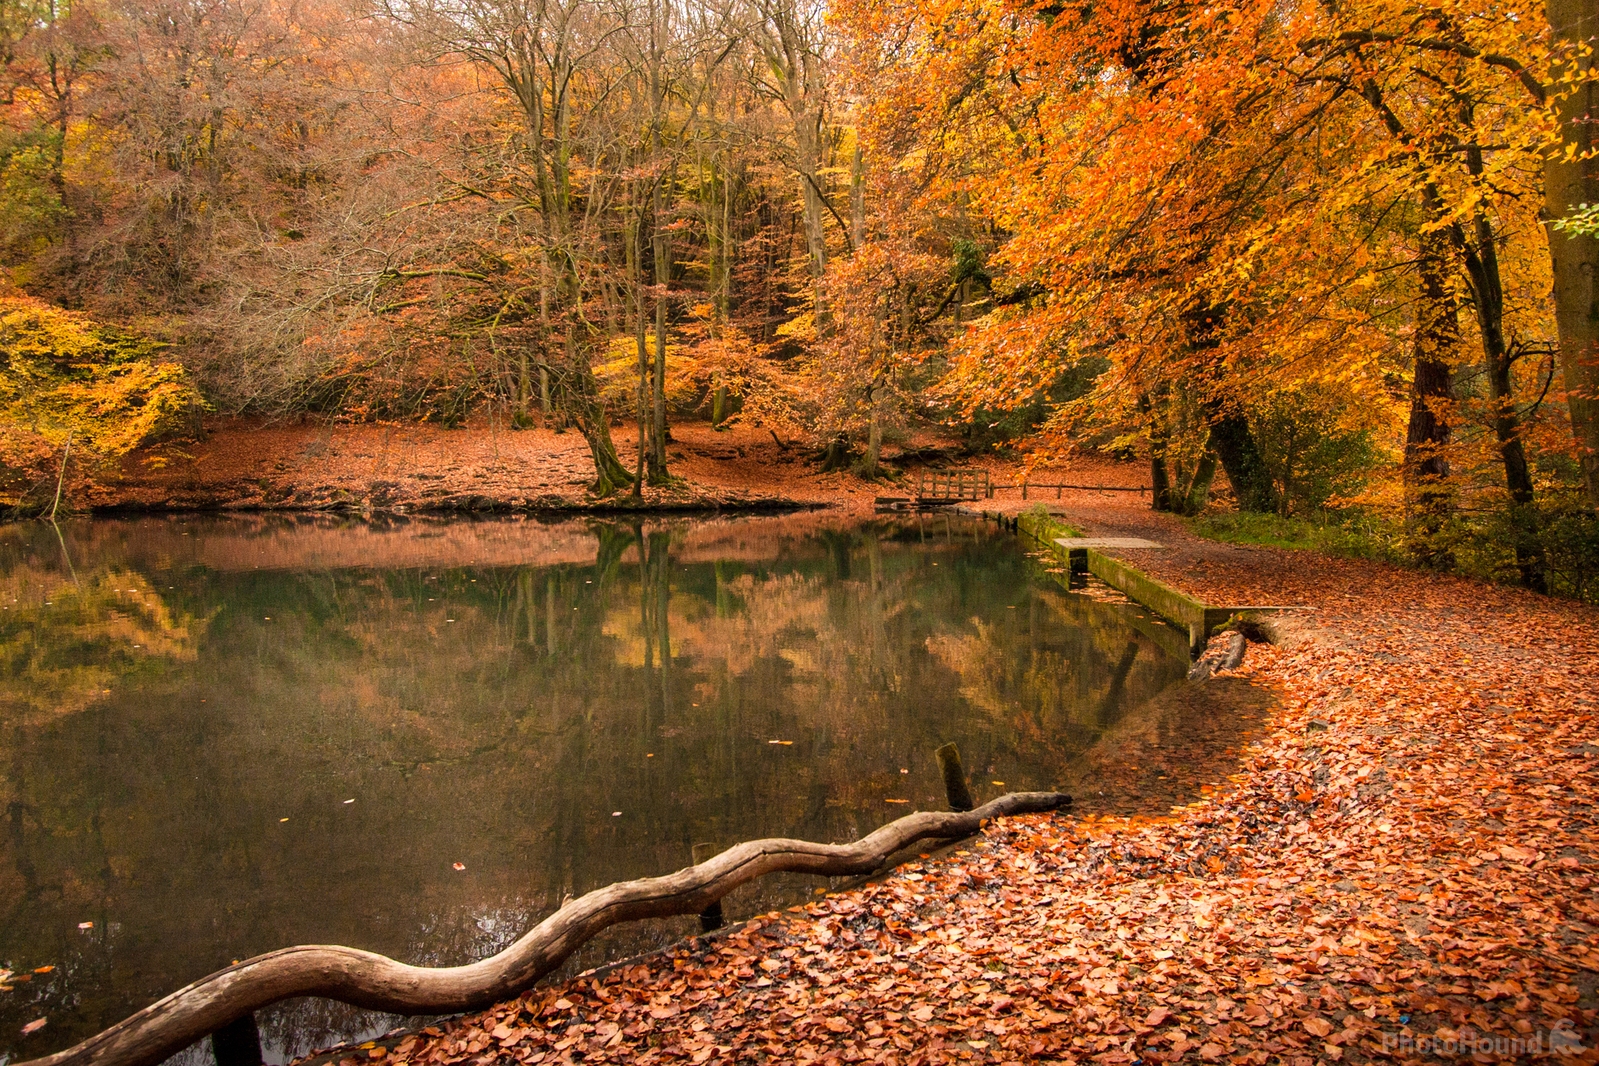 Image of Waggoners Wells, Grayshott by Nicky Rhodes